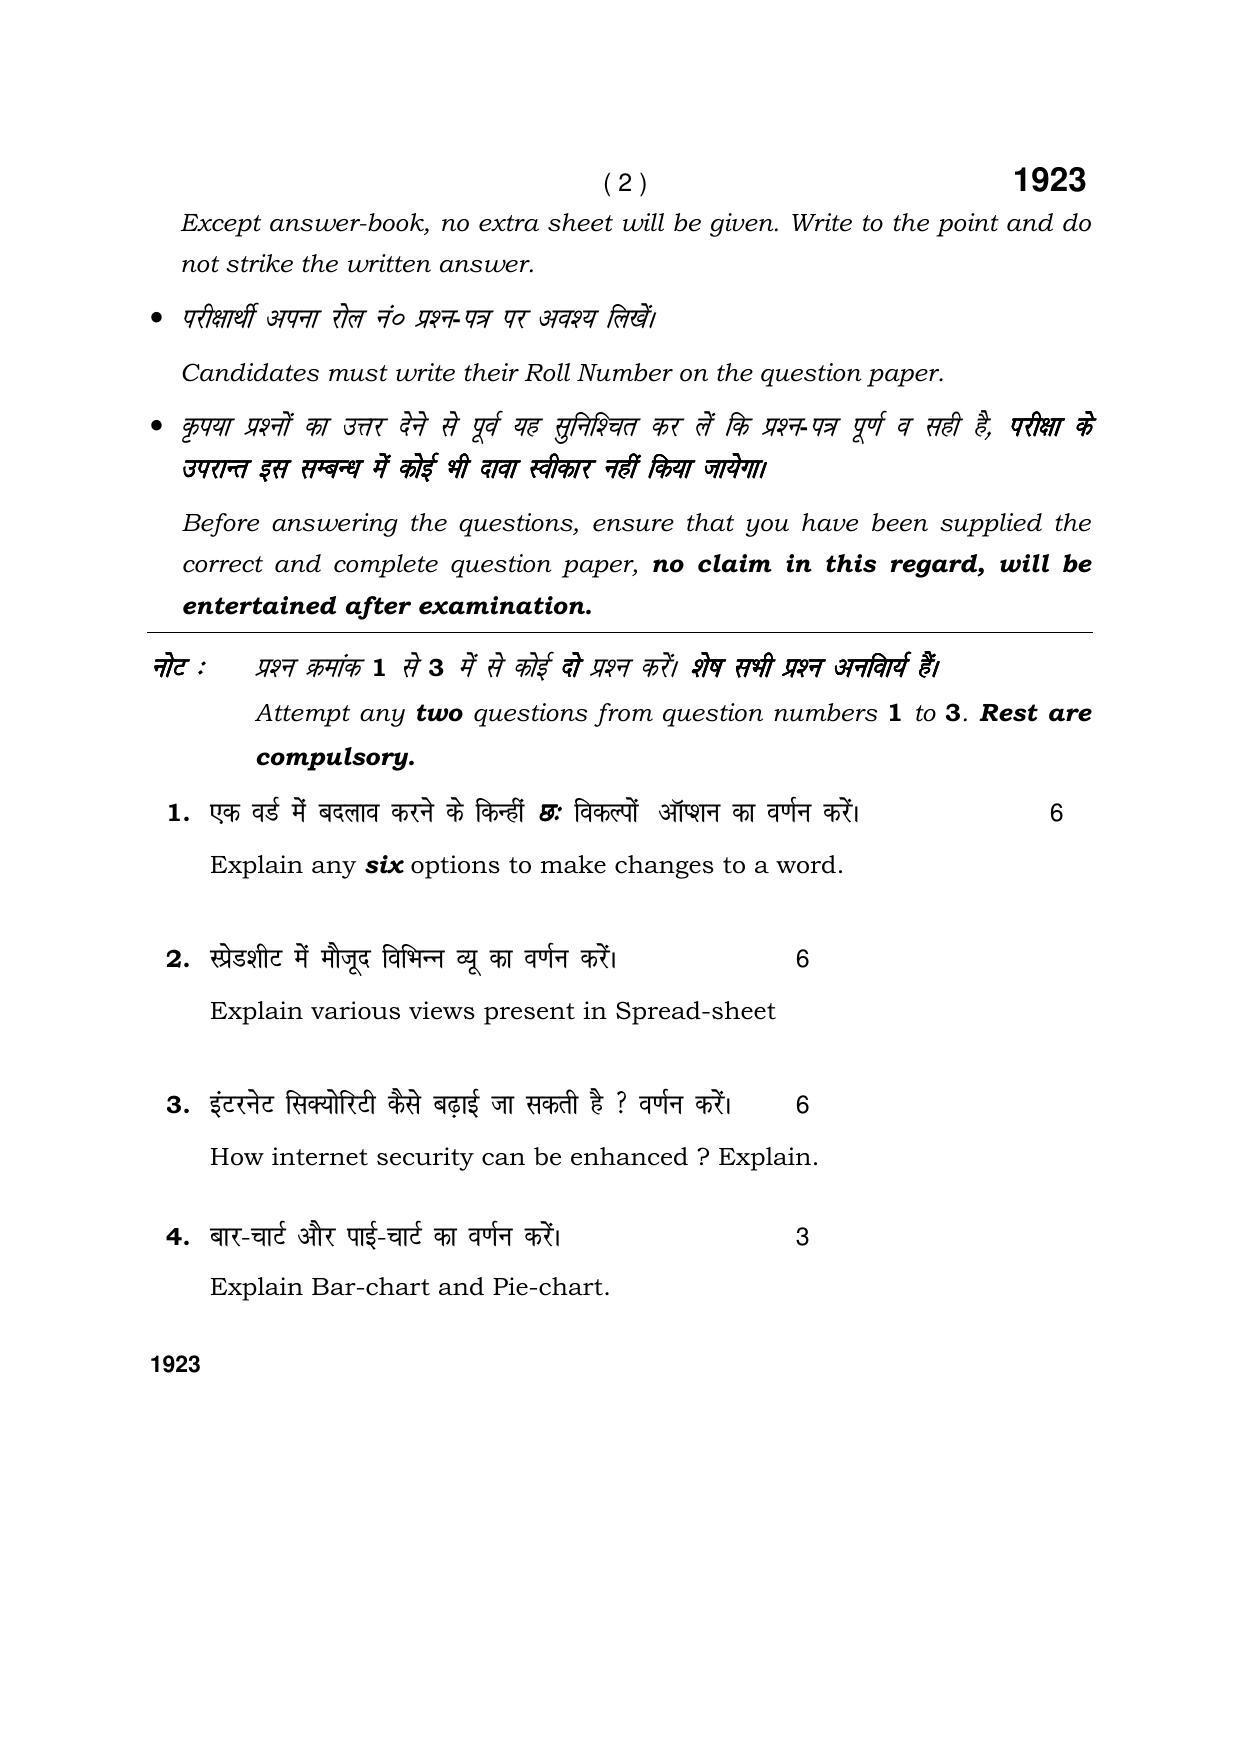 Haryana Board HBSE Class 10 IT & ITES 1923 (Level-2) 2017 Question Paper - Page 2